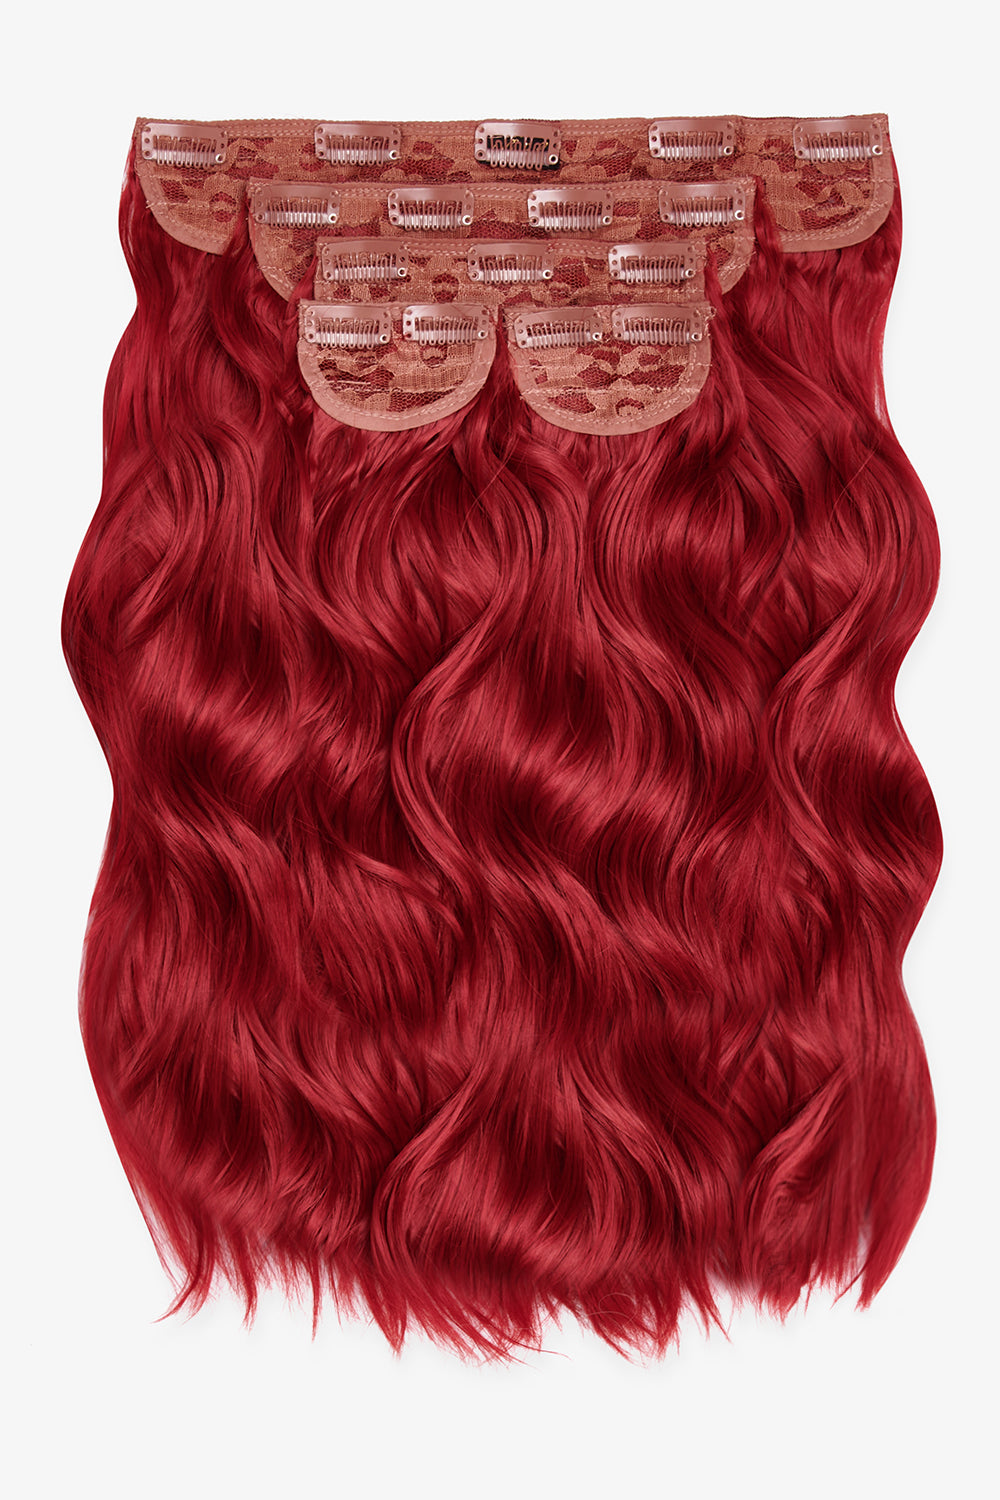 Super Thick 16’’ 5 Piece Brushed Out Wave Clip In Hair Extensions + Hair Care Bundle - Burgundy Ruby Red